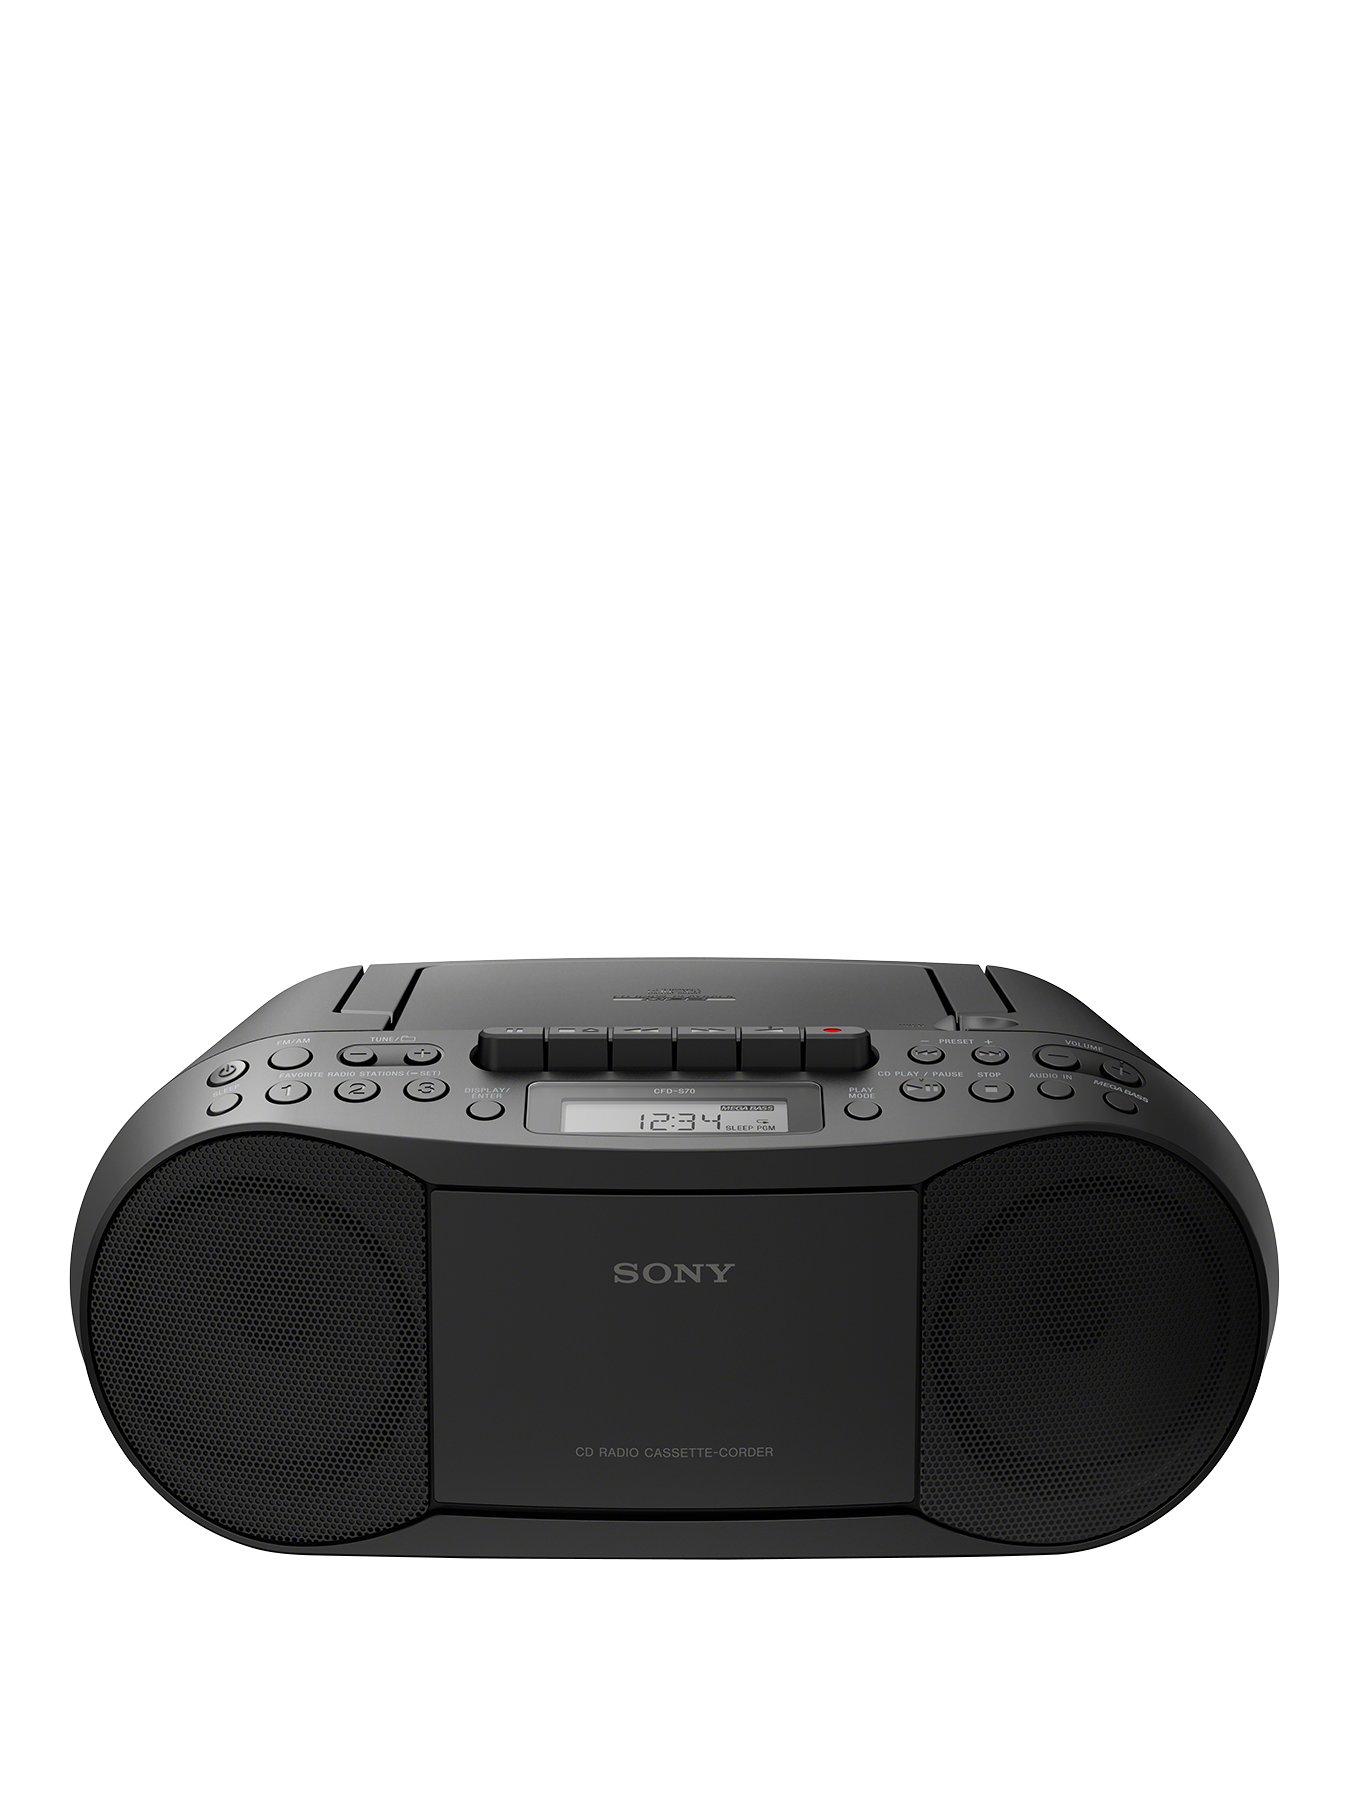 Sony CFD-S70 Portable CD Radio Cassette Player - Black 